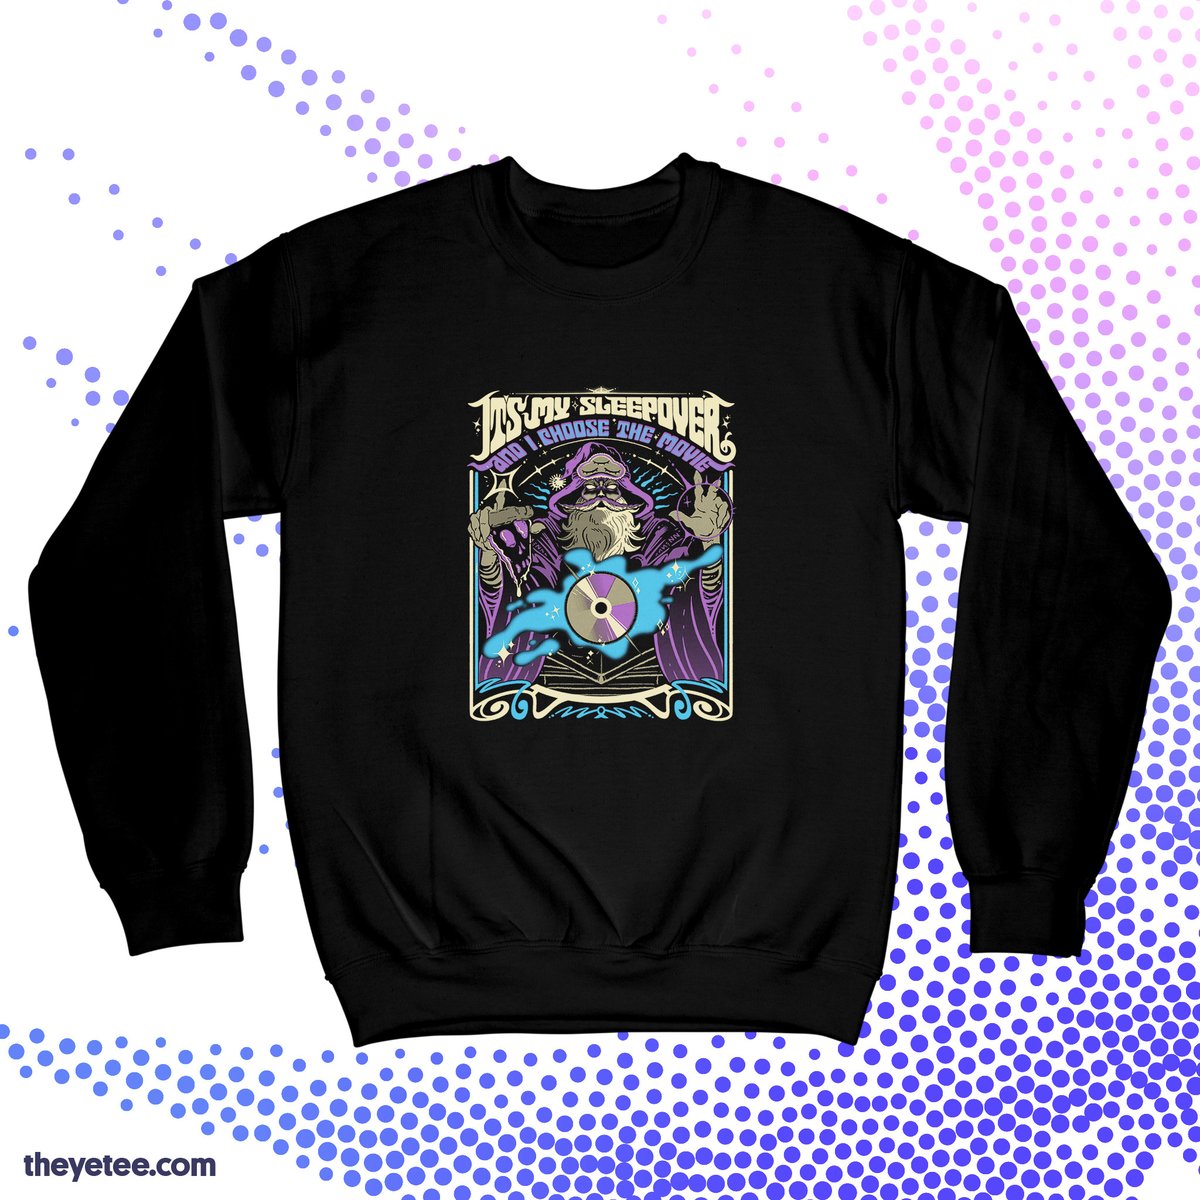 「MOTHER HATH SAYETH 'TWAS MINE TURN TO SE」|The Yetee 🌈のイラスト